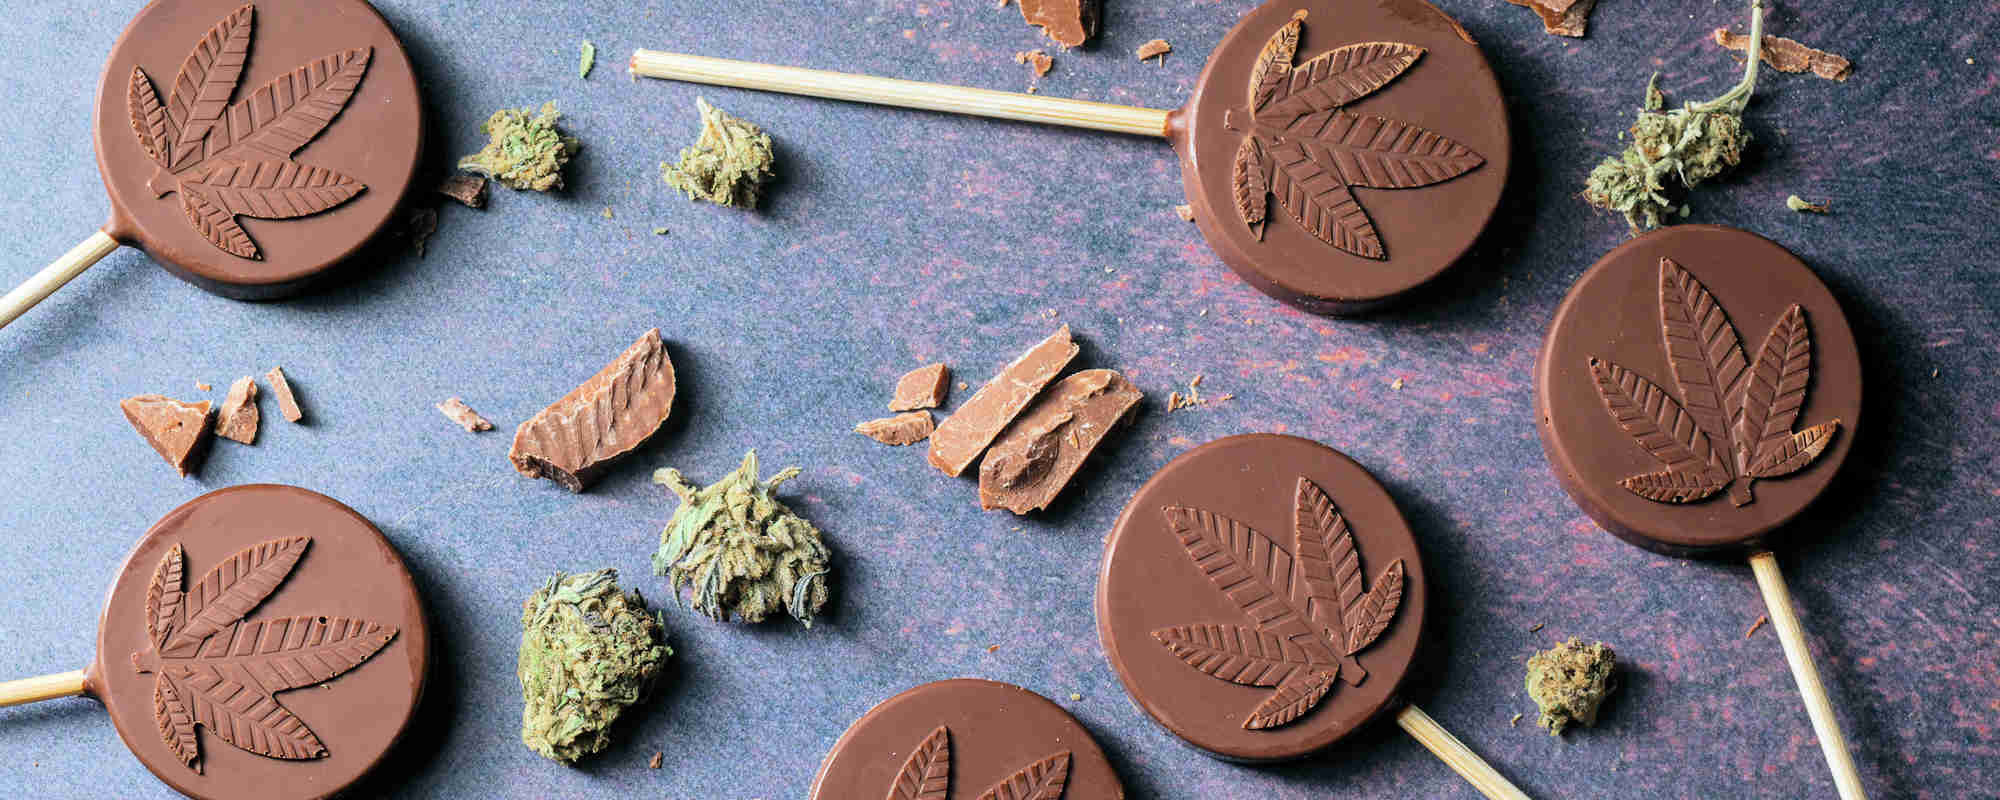 Cannabis and Chocolate: Analytical Testing Challenges and Progress